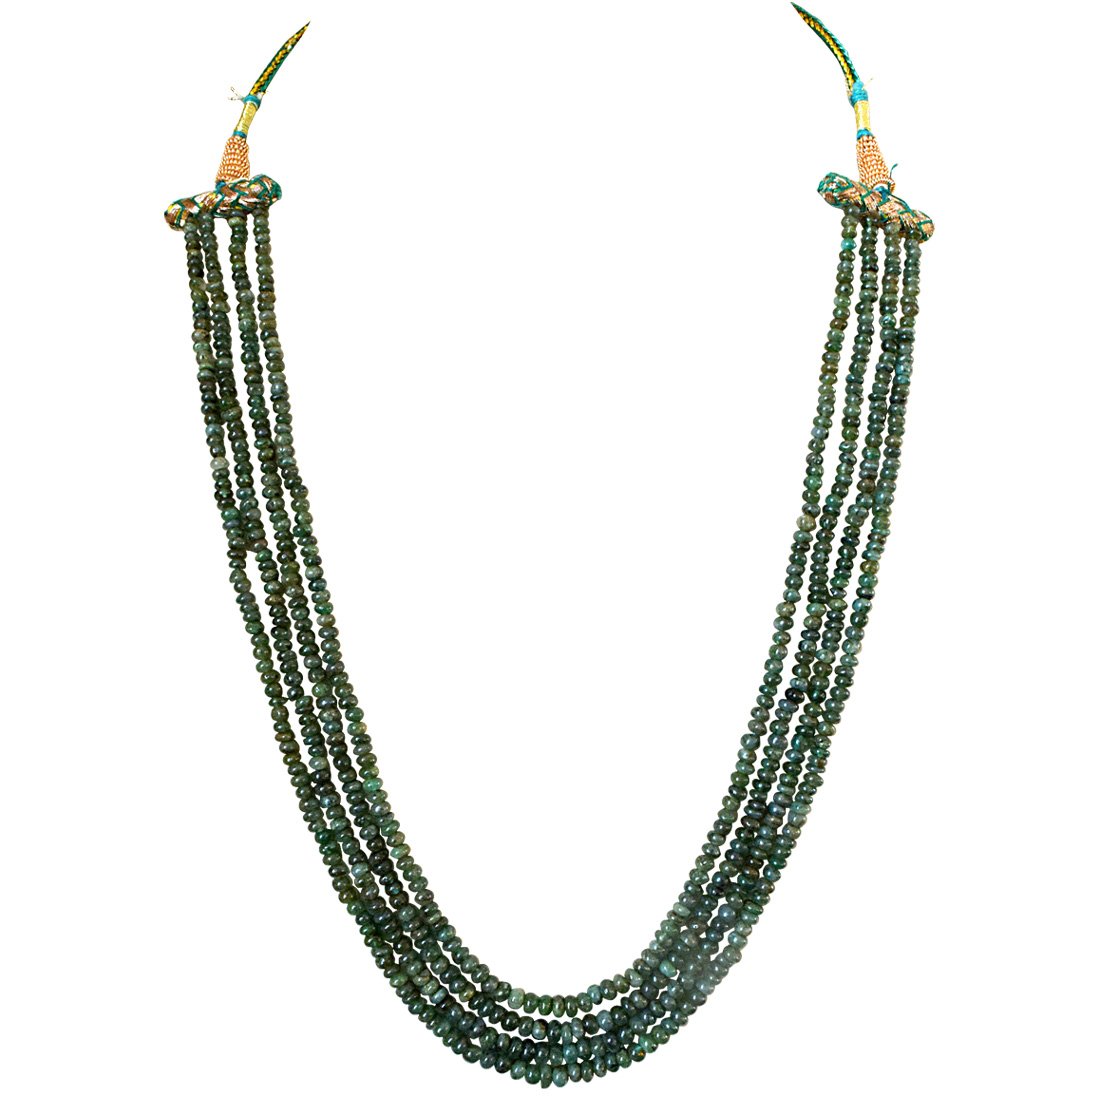 4 Line 176cts REAL Natural Green Emerald Beads Necklace for Women (176cts EMR Neck)